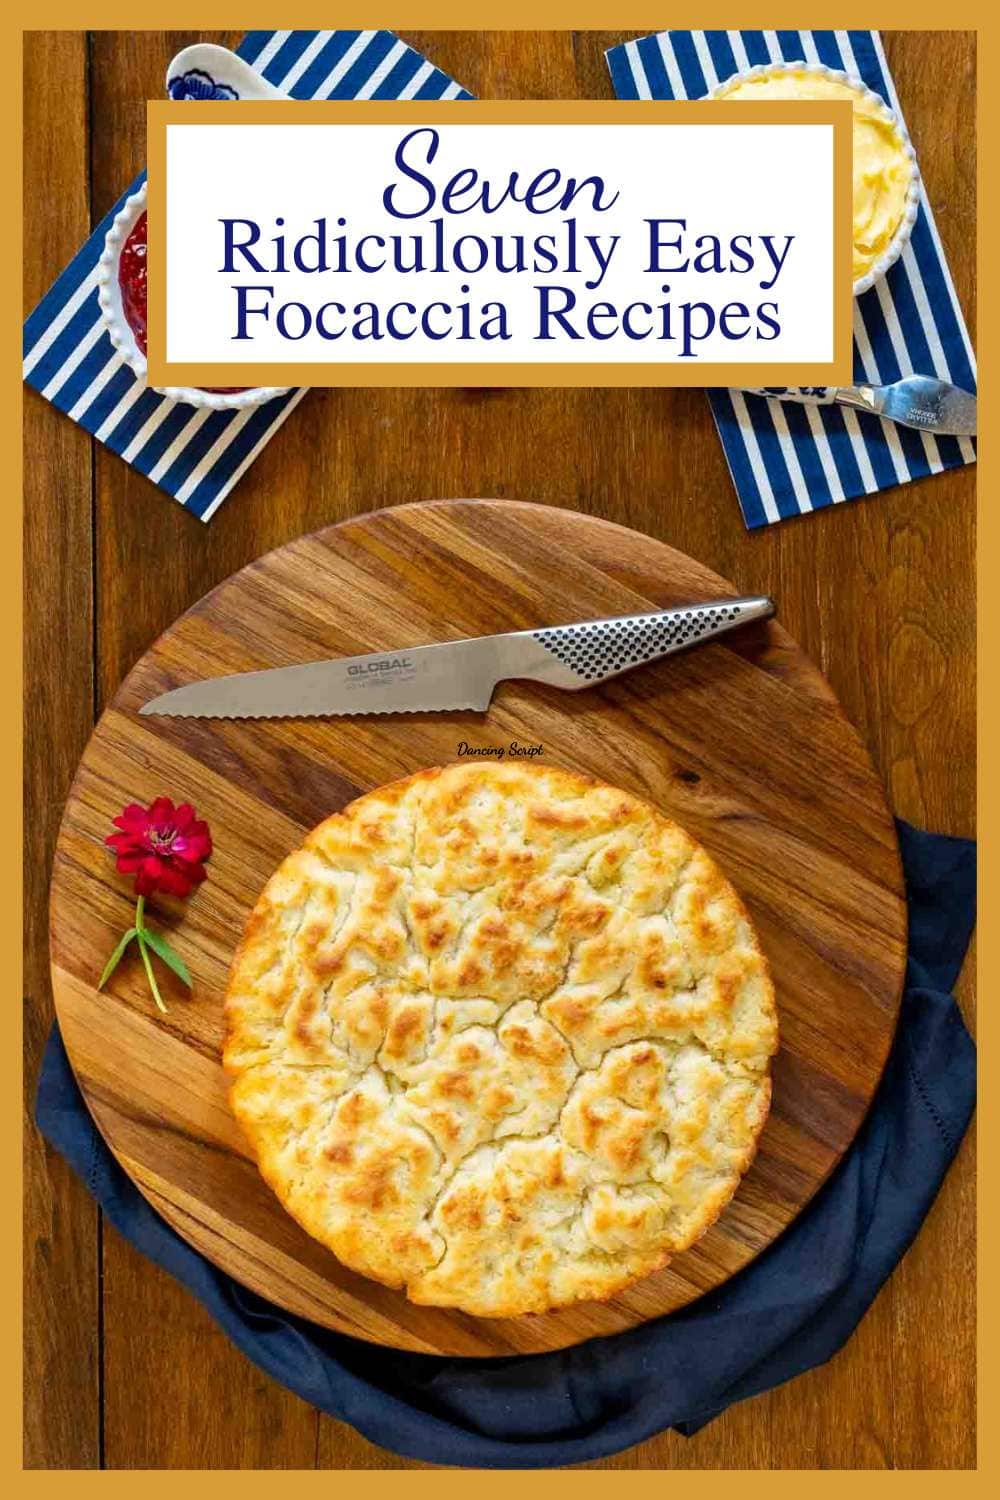 7 Ridiculously Easy Focaccia Recipes That Will Make you Look Ridiculously Clever